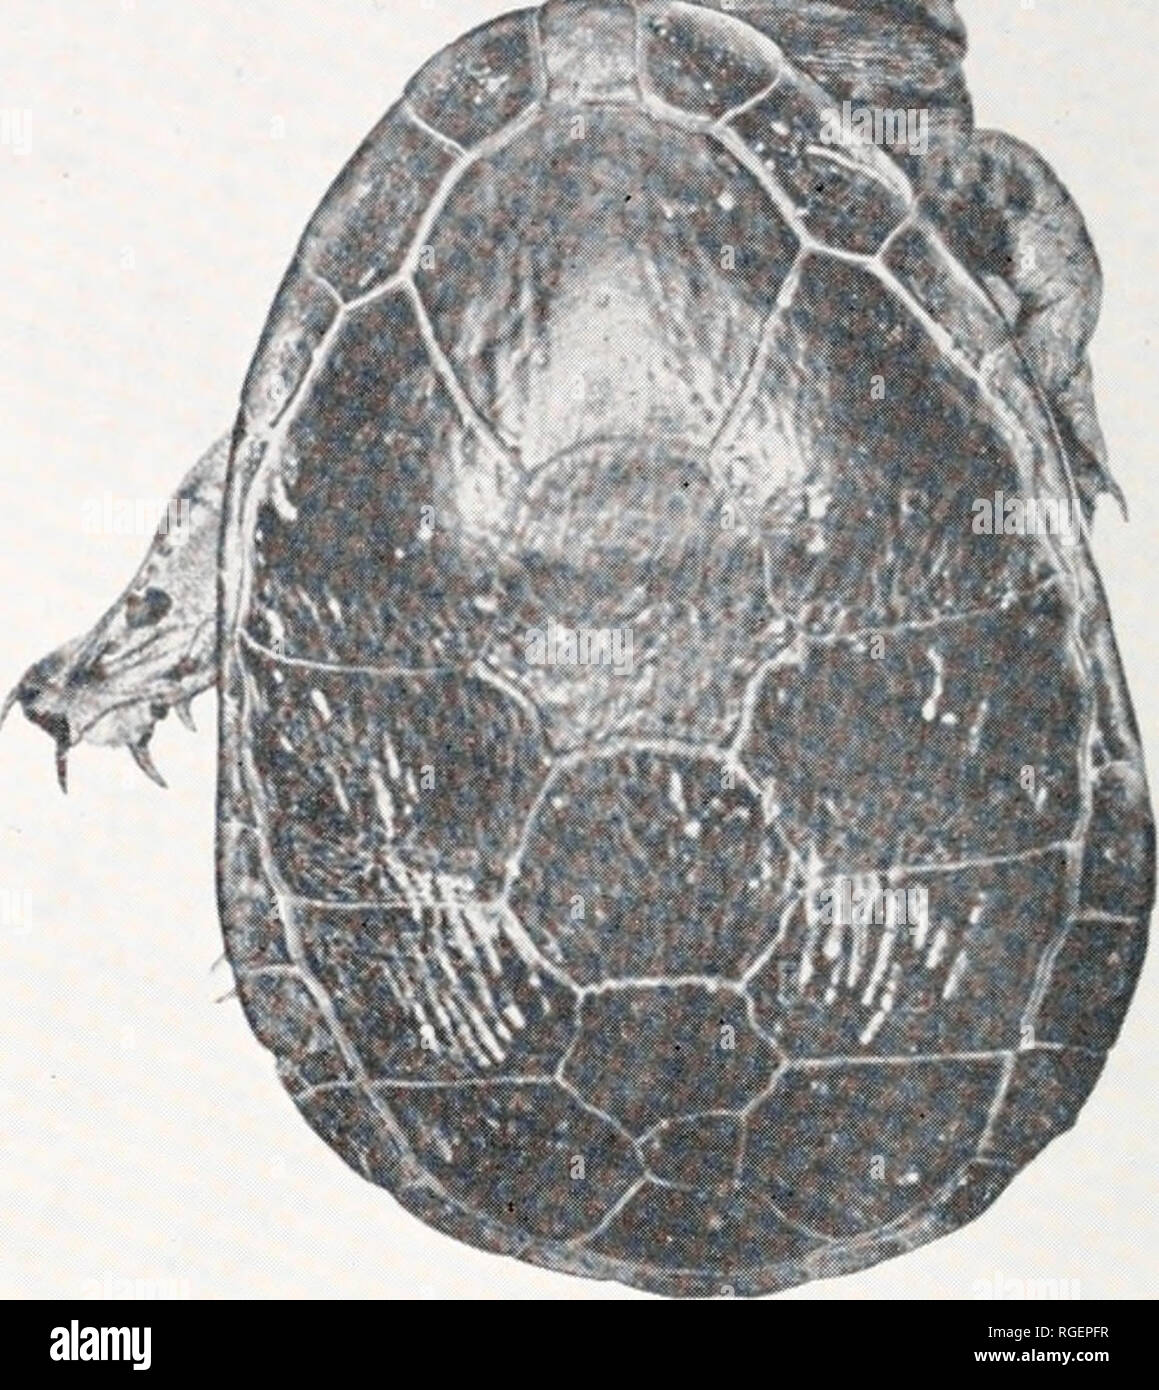 . Bulletin of the Museum of Comparative Zoology at Harvard College. Zoology. I Figure 1. Ventral and dorsal views of the type specimen of Chelodina siebenrocki from Werner (1901). In addition to the 21 Museum of Compar- ative Zoology specimens, we have examined six other turtles referable to C. siebenrocki. These include four collected by Parker and deposited in the Australian Museum in Sydney (AMS) and the American Museum of Natural History in New York (AMNH), and two collected by Miiller in 1886 and deposited in the Staatliches Museum fiir Naturkunde in Stuttgart (SMNS)—bringing the total to Stock Photo